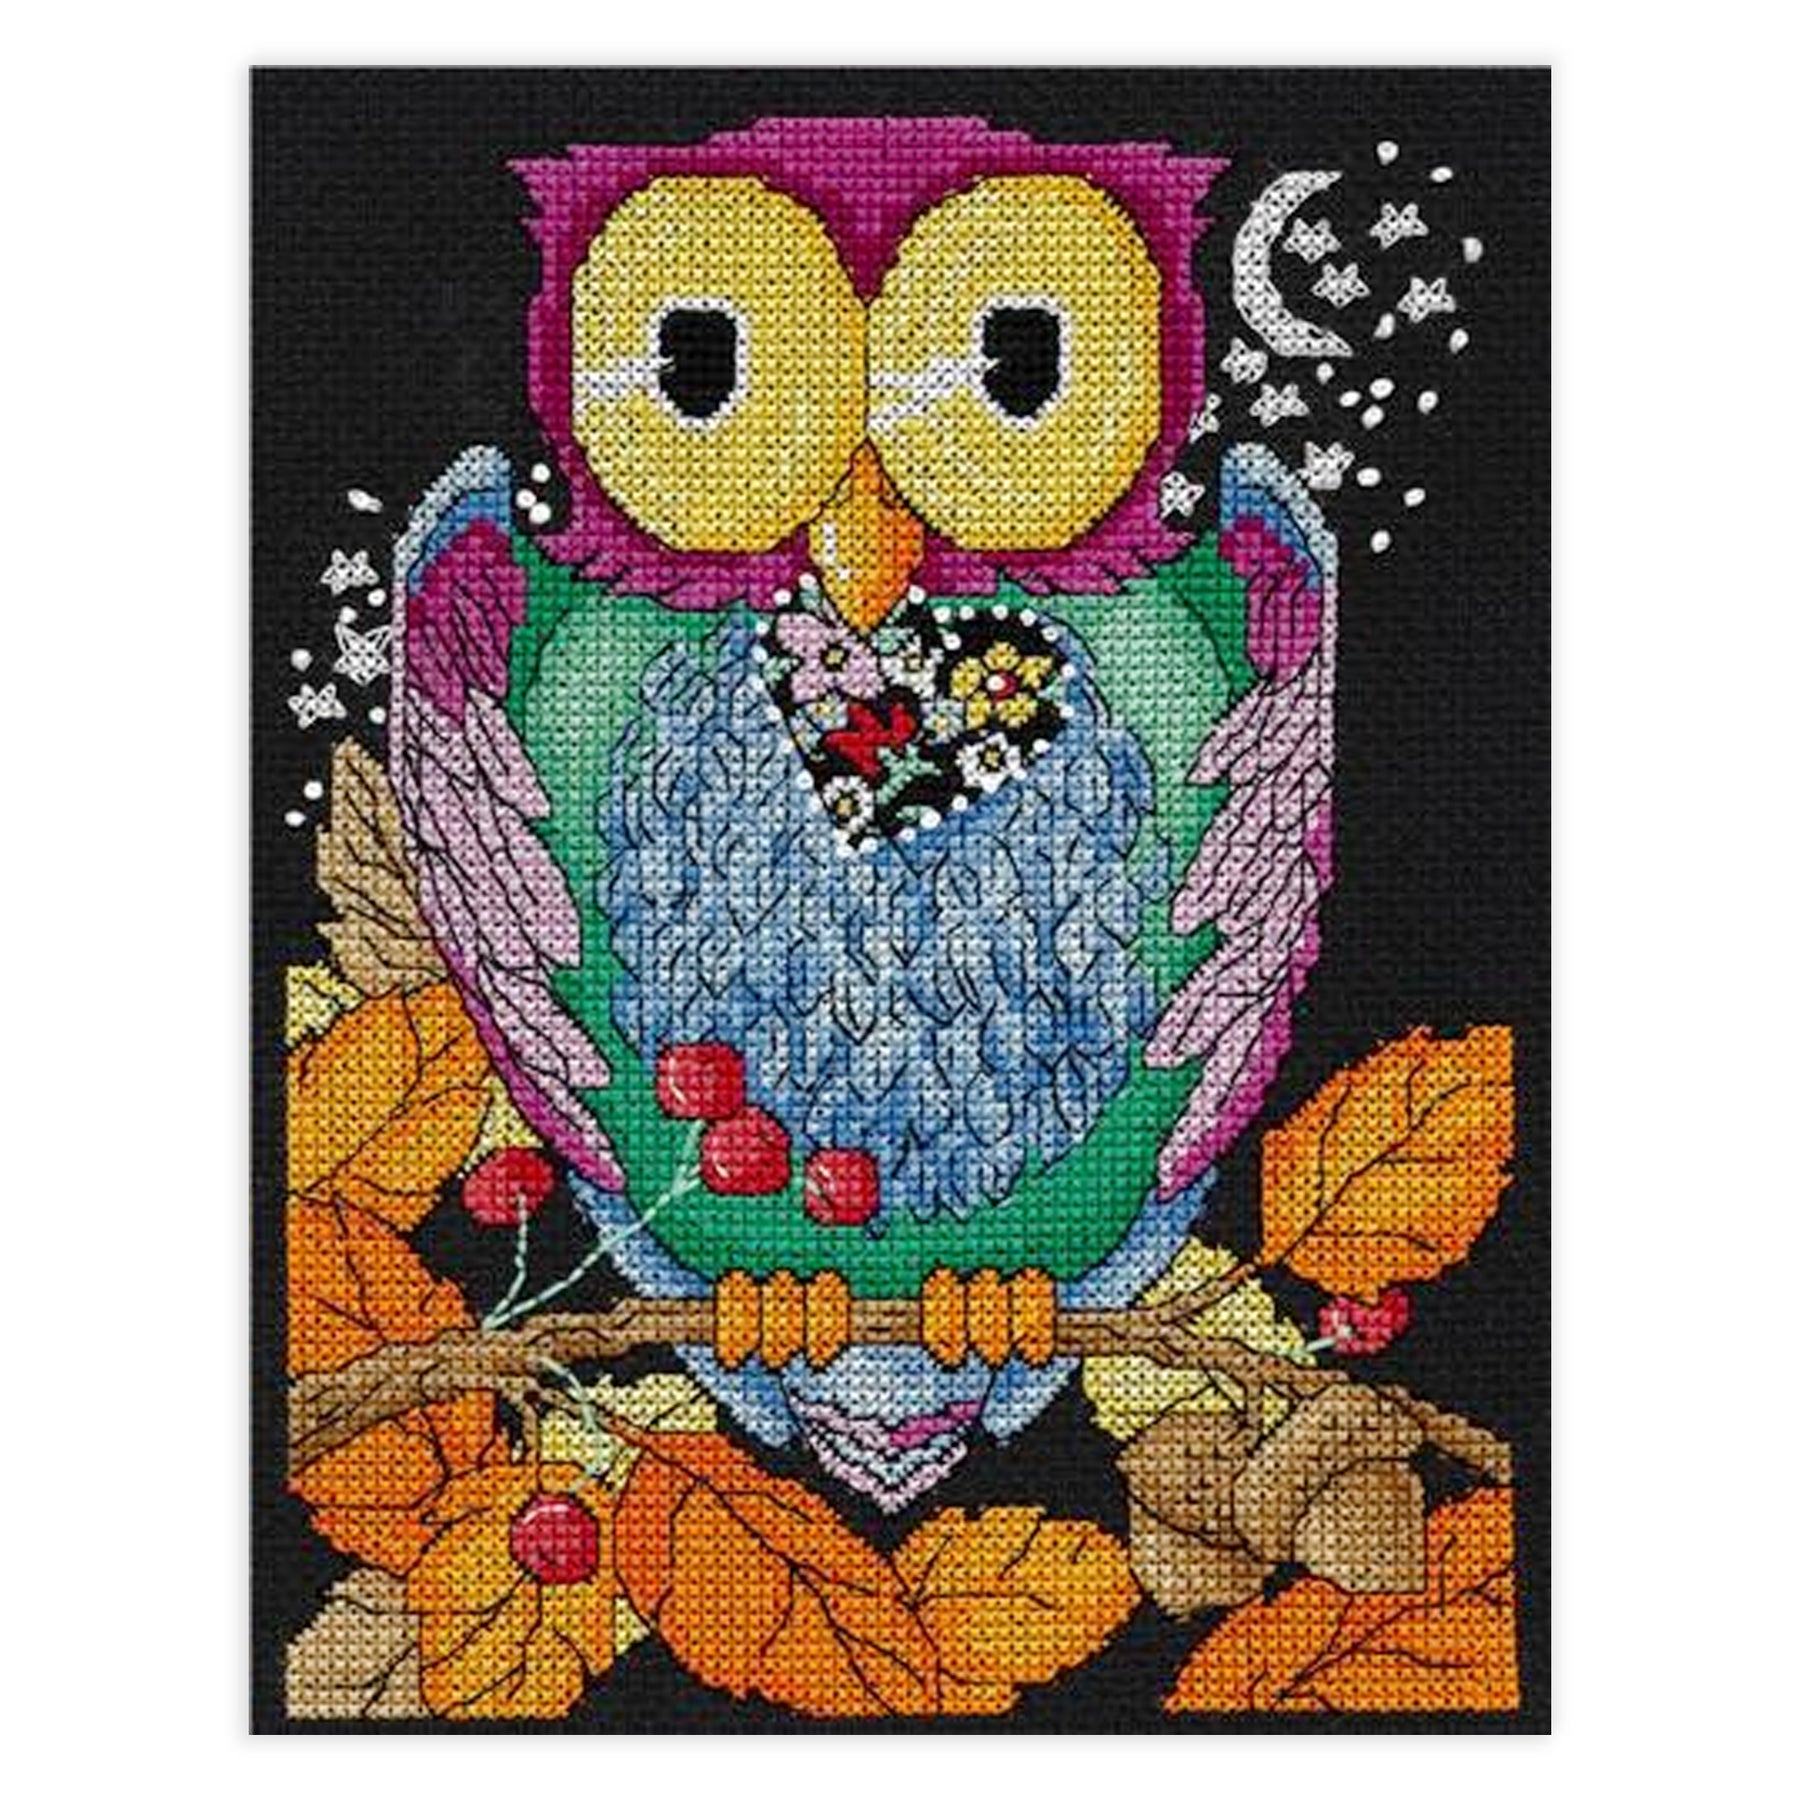 Hoo Loves You Counted Cross Stitch Leaflet